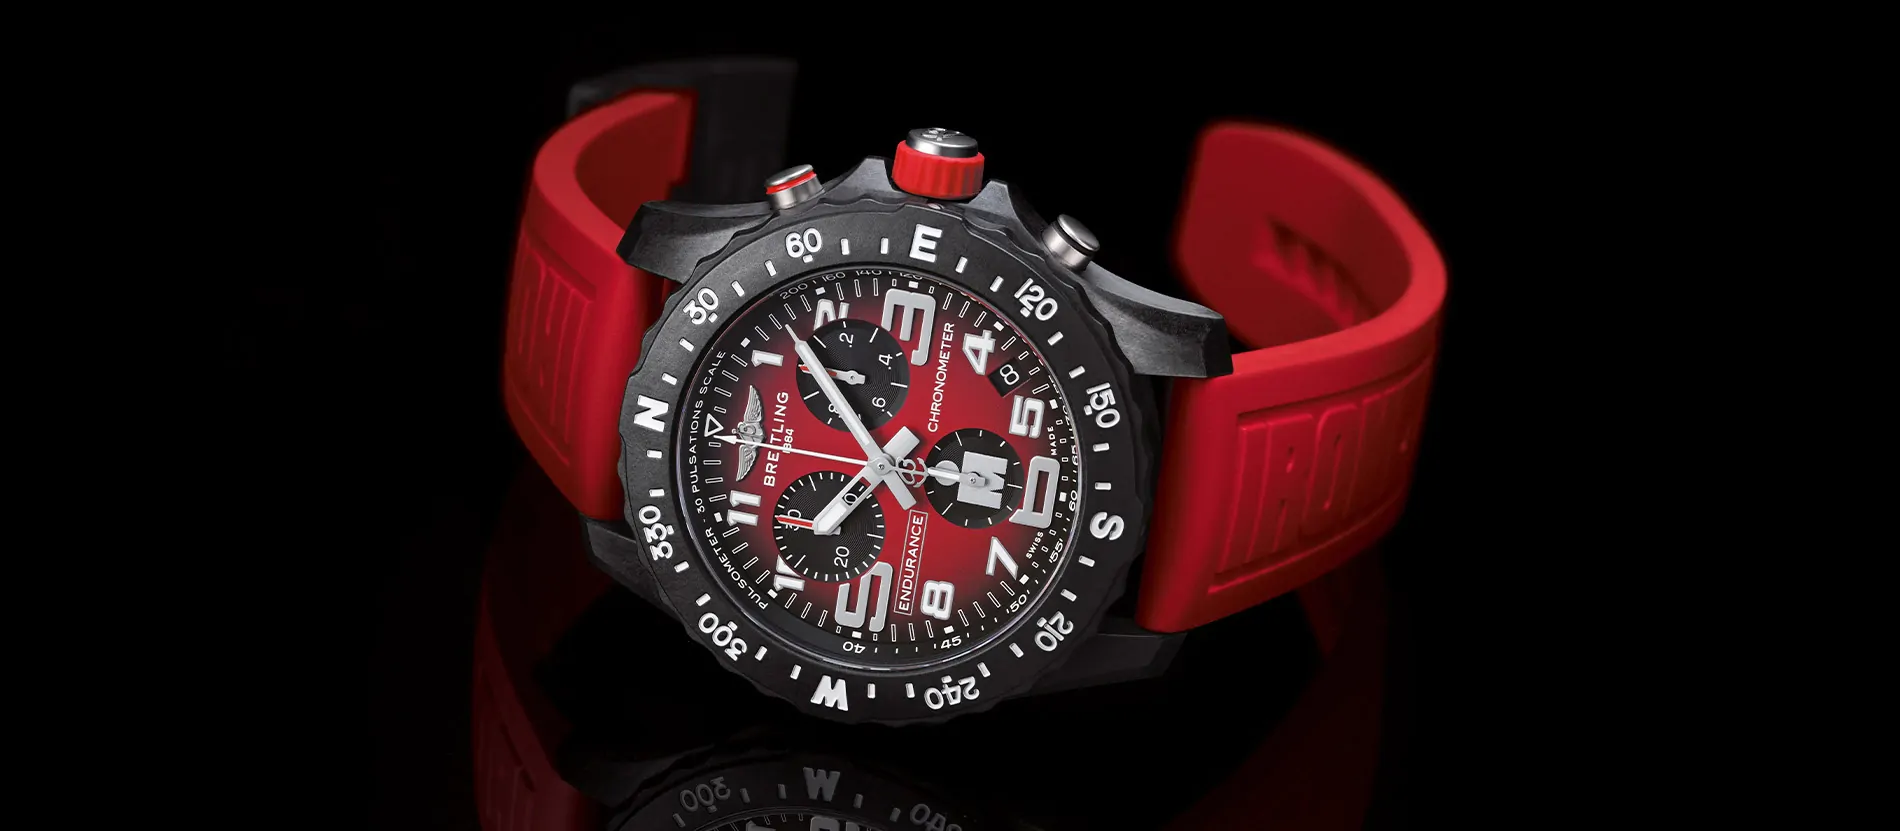 Breitling Endurance Pro IRONMAN: LIVE. PLAY. REPEAT